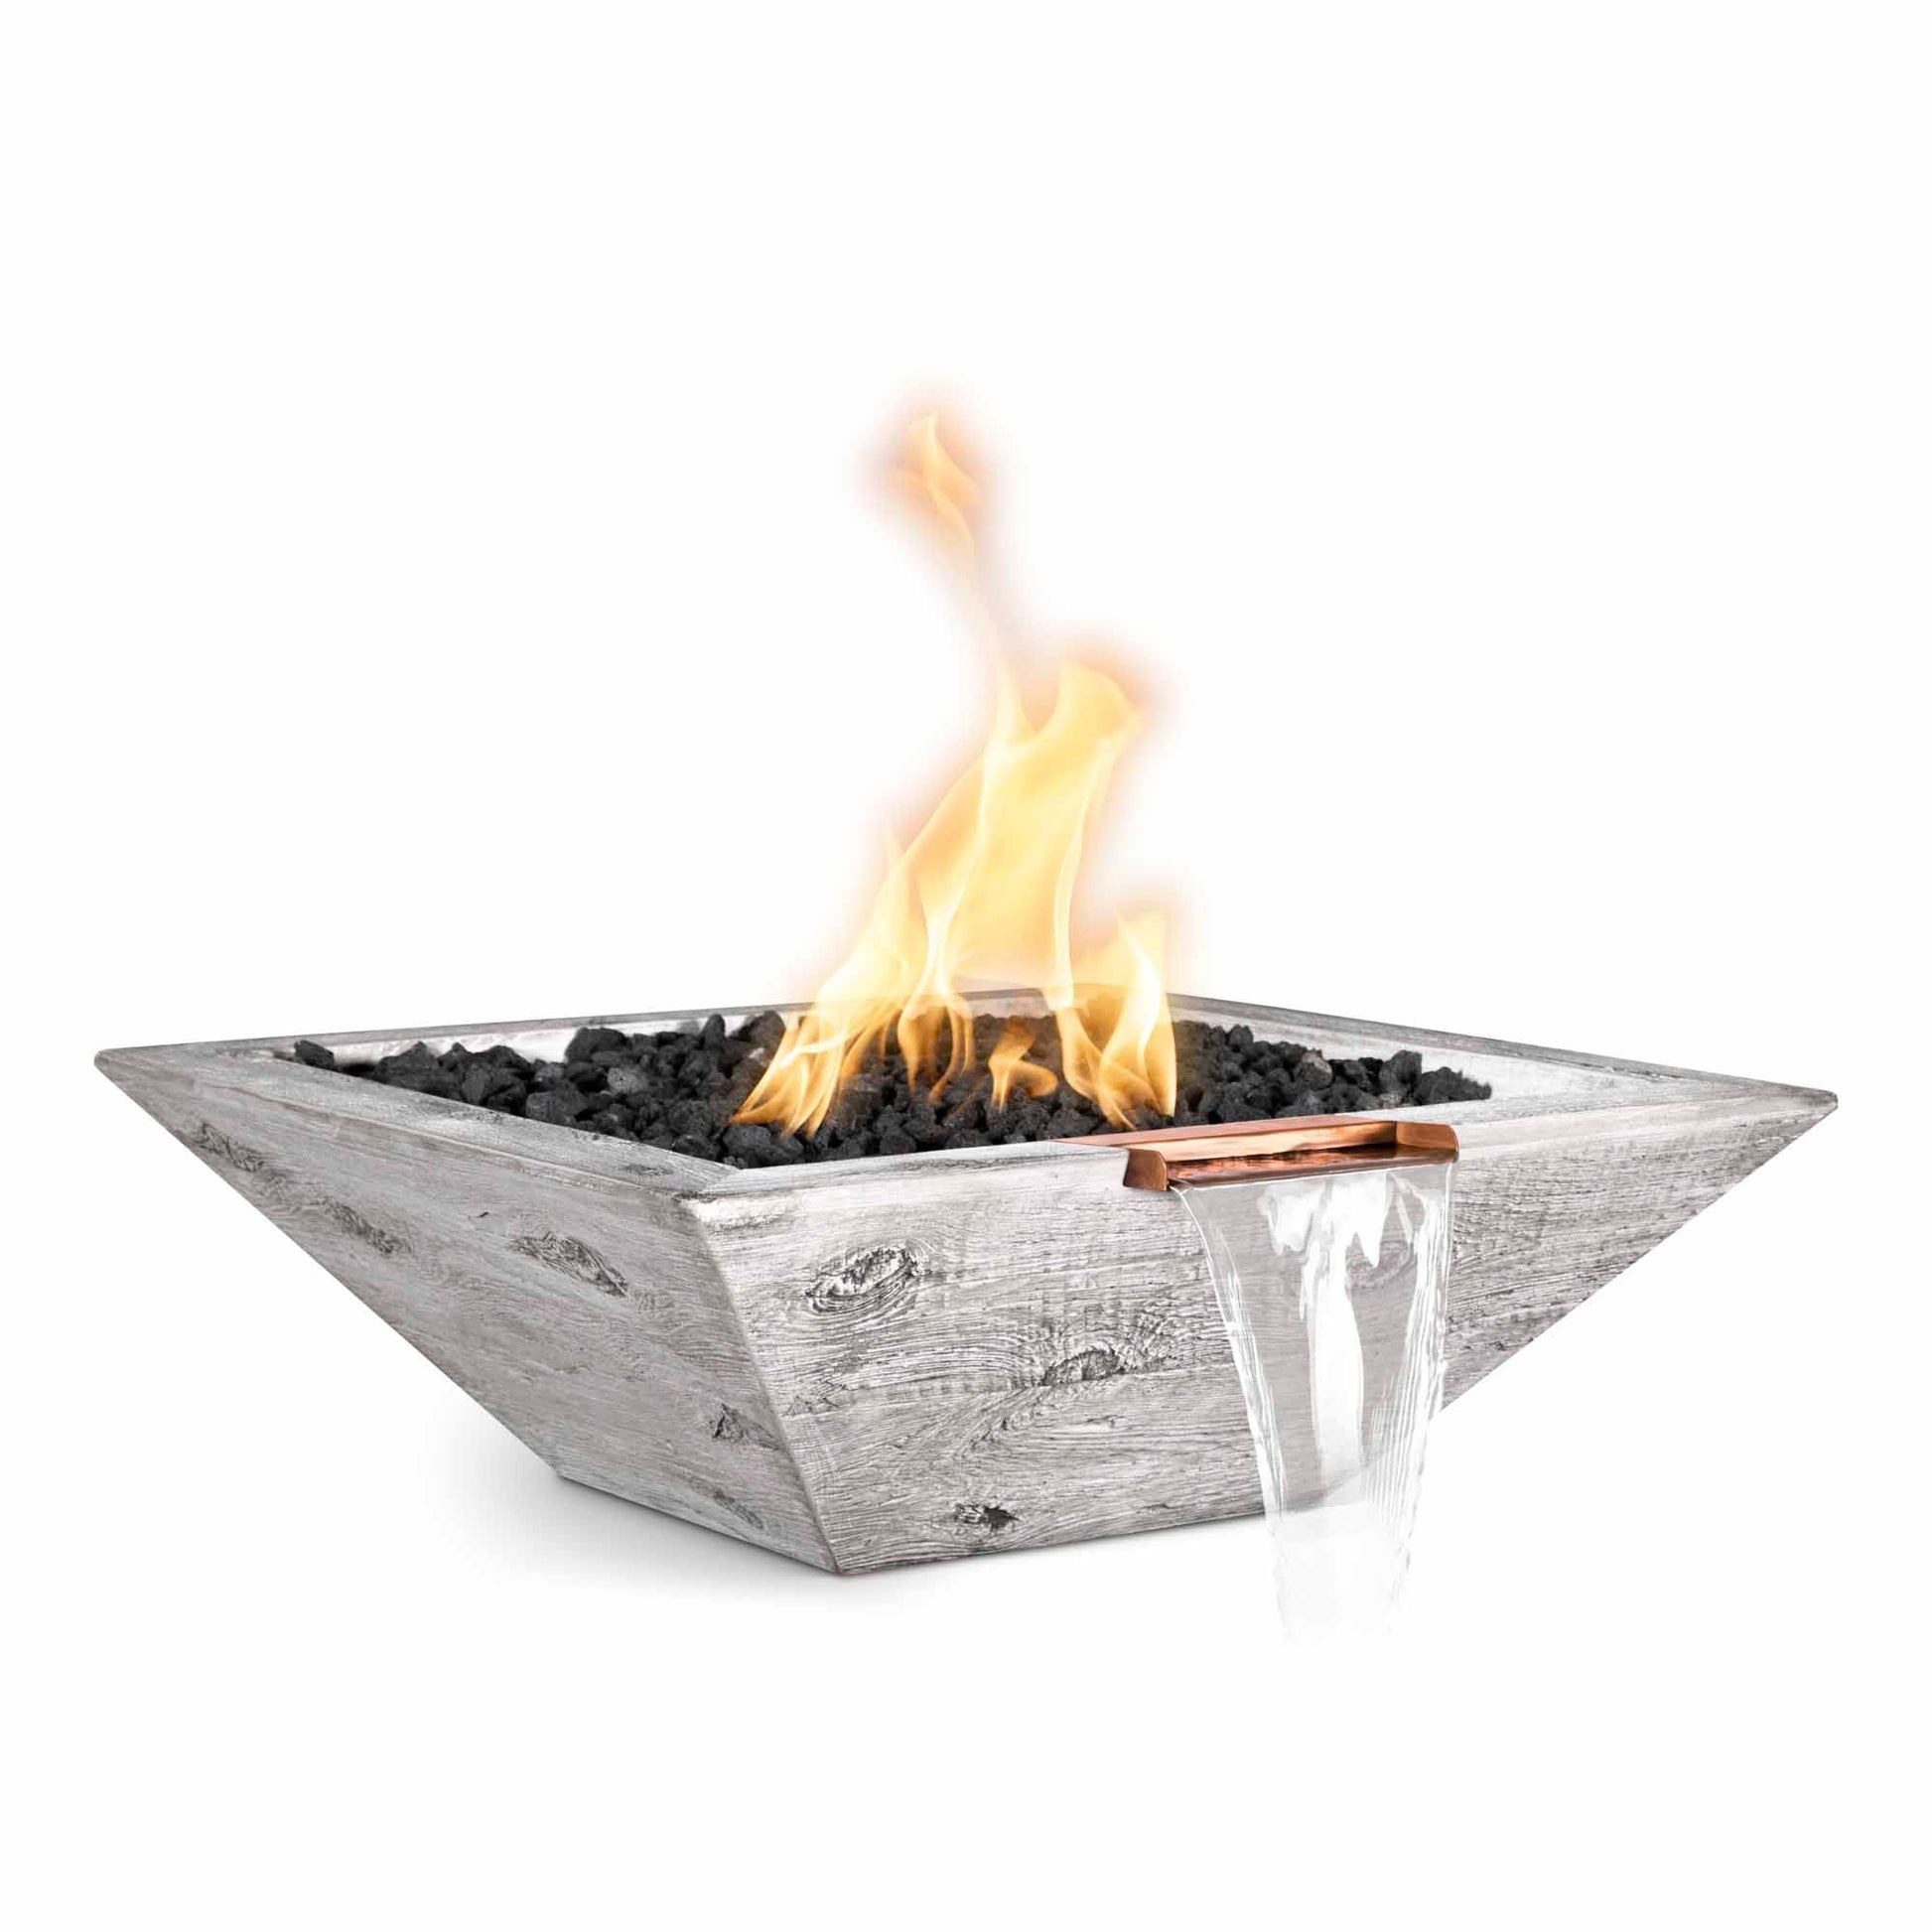 The Outdoor Plus Square Maya 24" Ebony Wood Grain Liquid Propane Fire & Water Bowl with Match Lit with Flame Sense Ignition